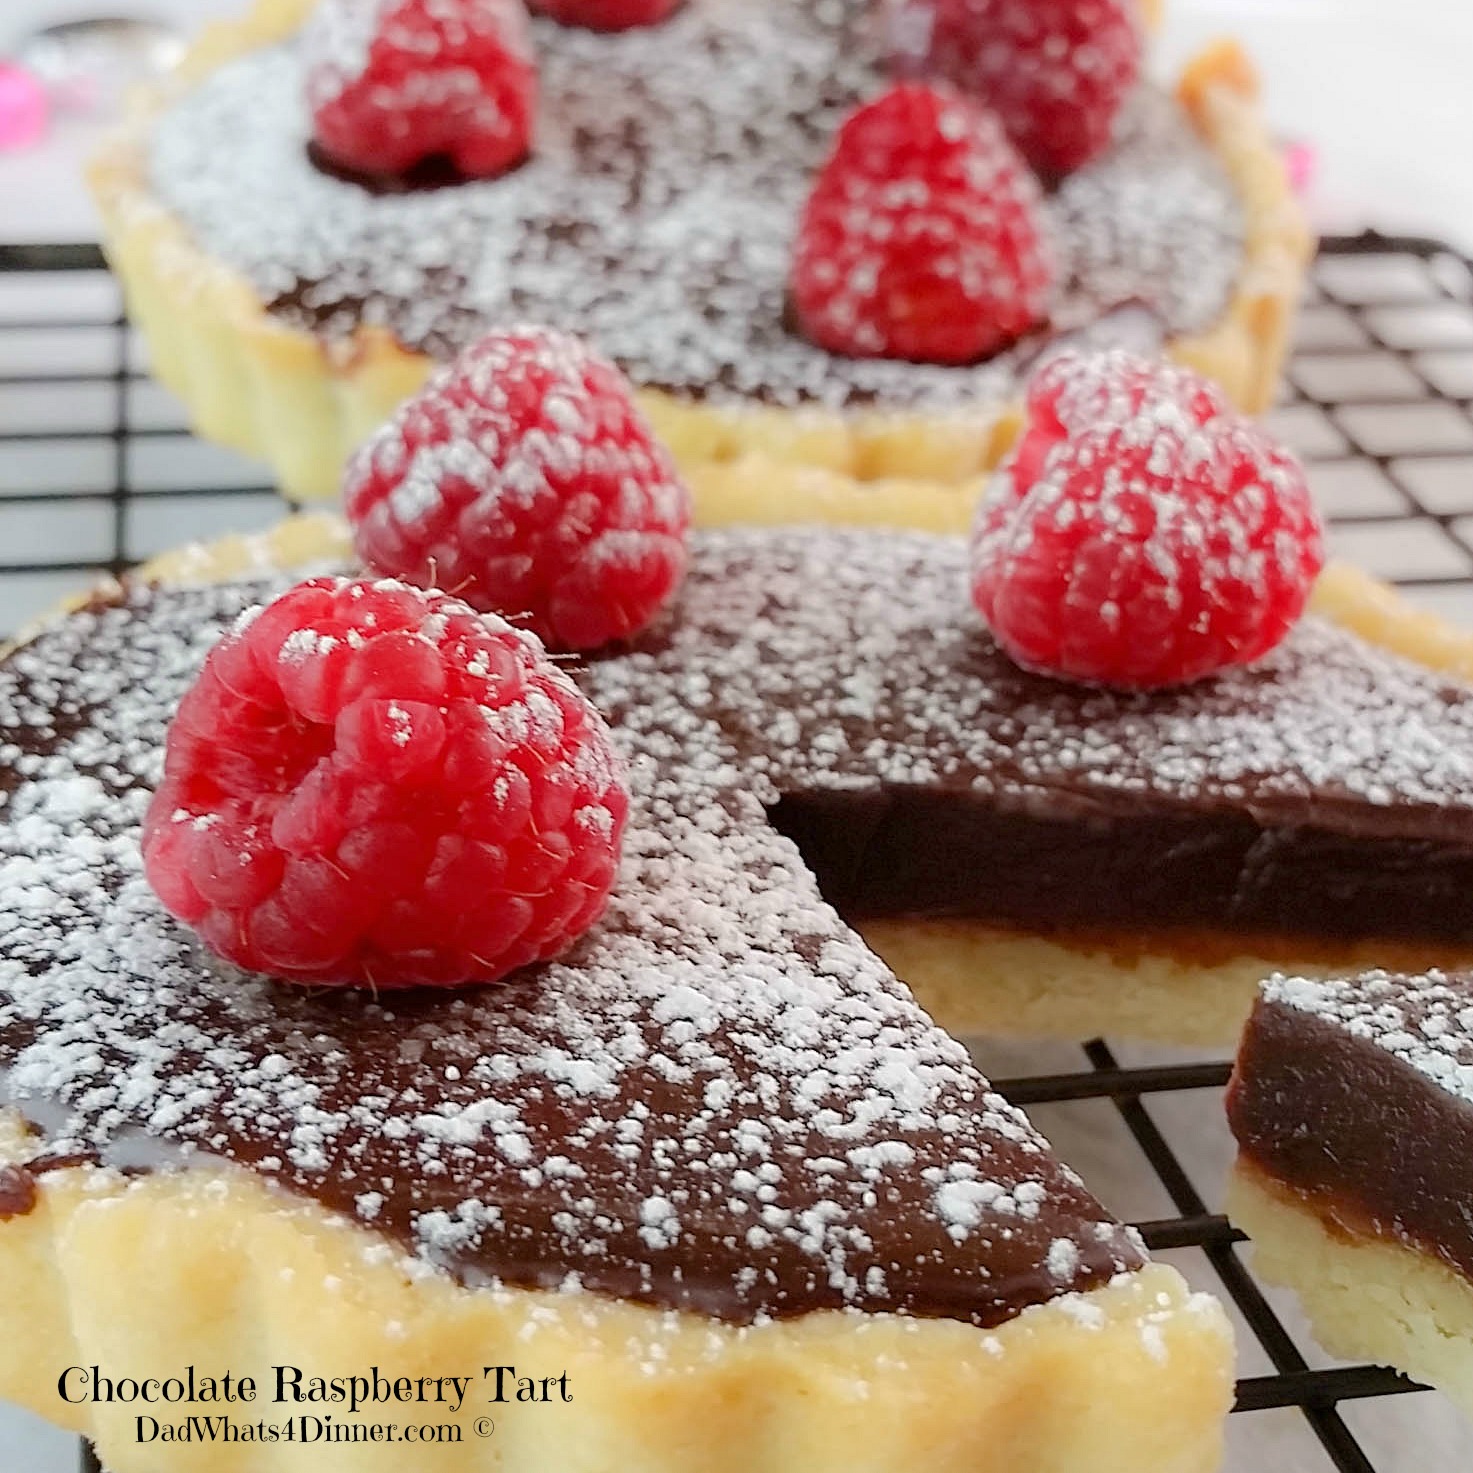 If you want to impress your significant other, make this Chocolate Raspberry Tart. The ultimate Valentine's Day dessert! | https://dadwhats4dinner.com